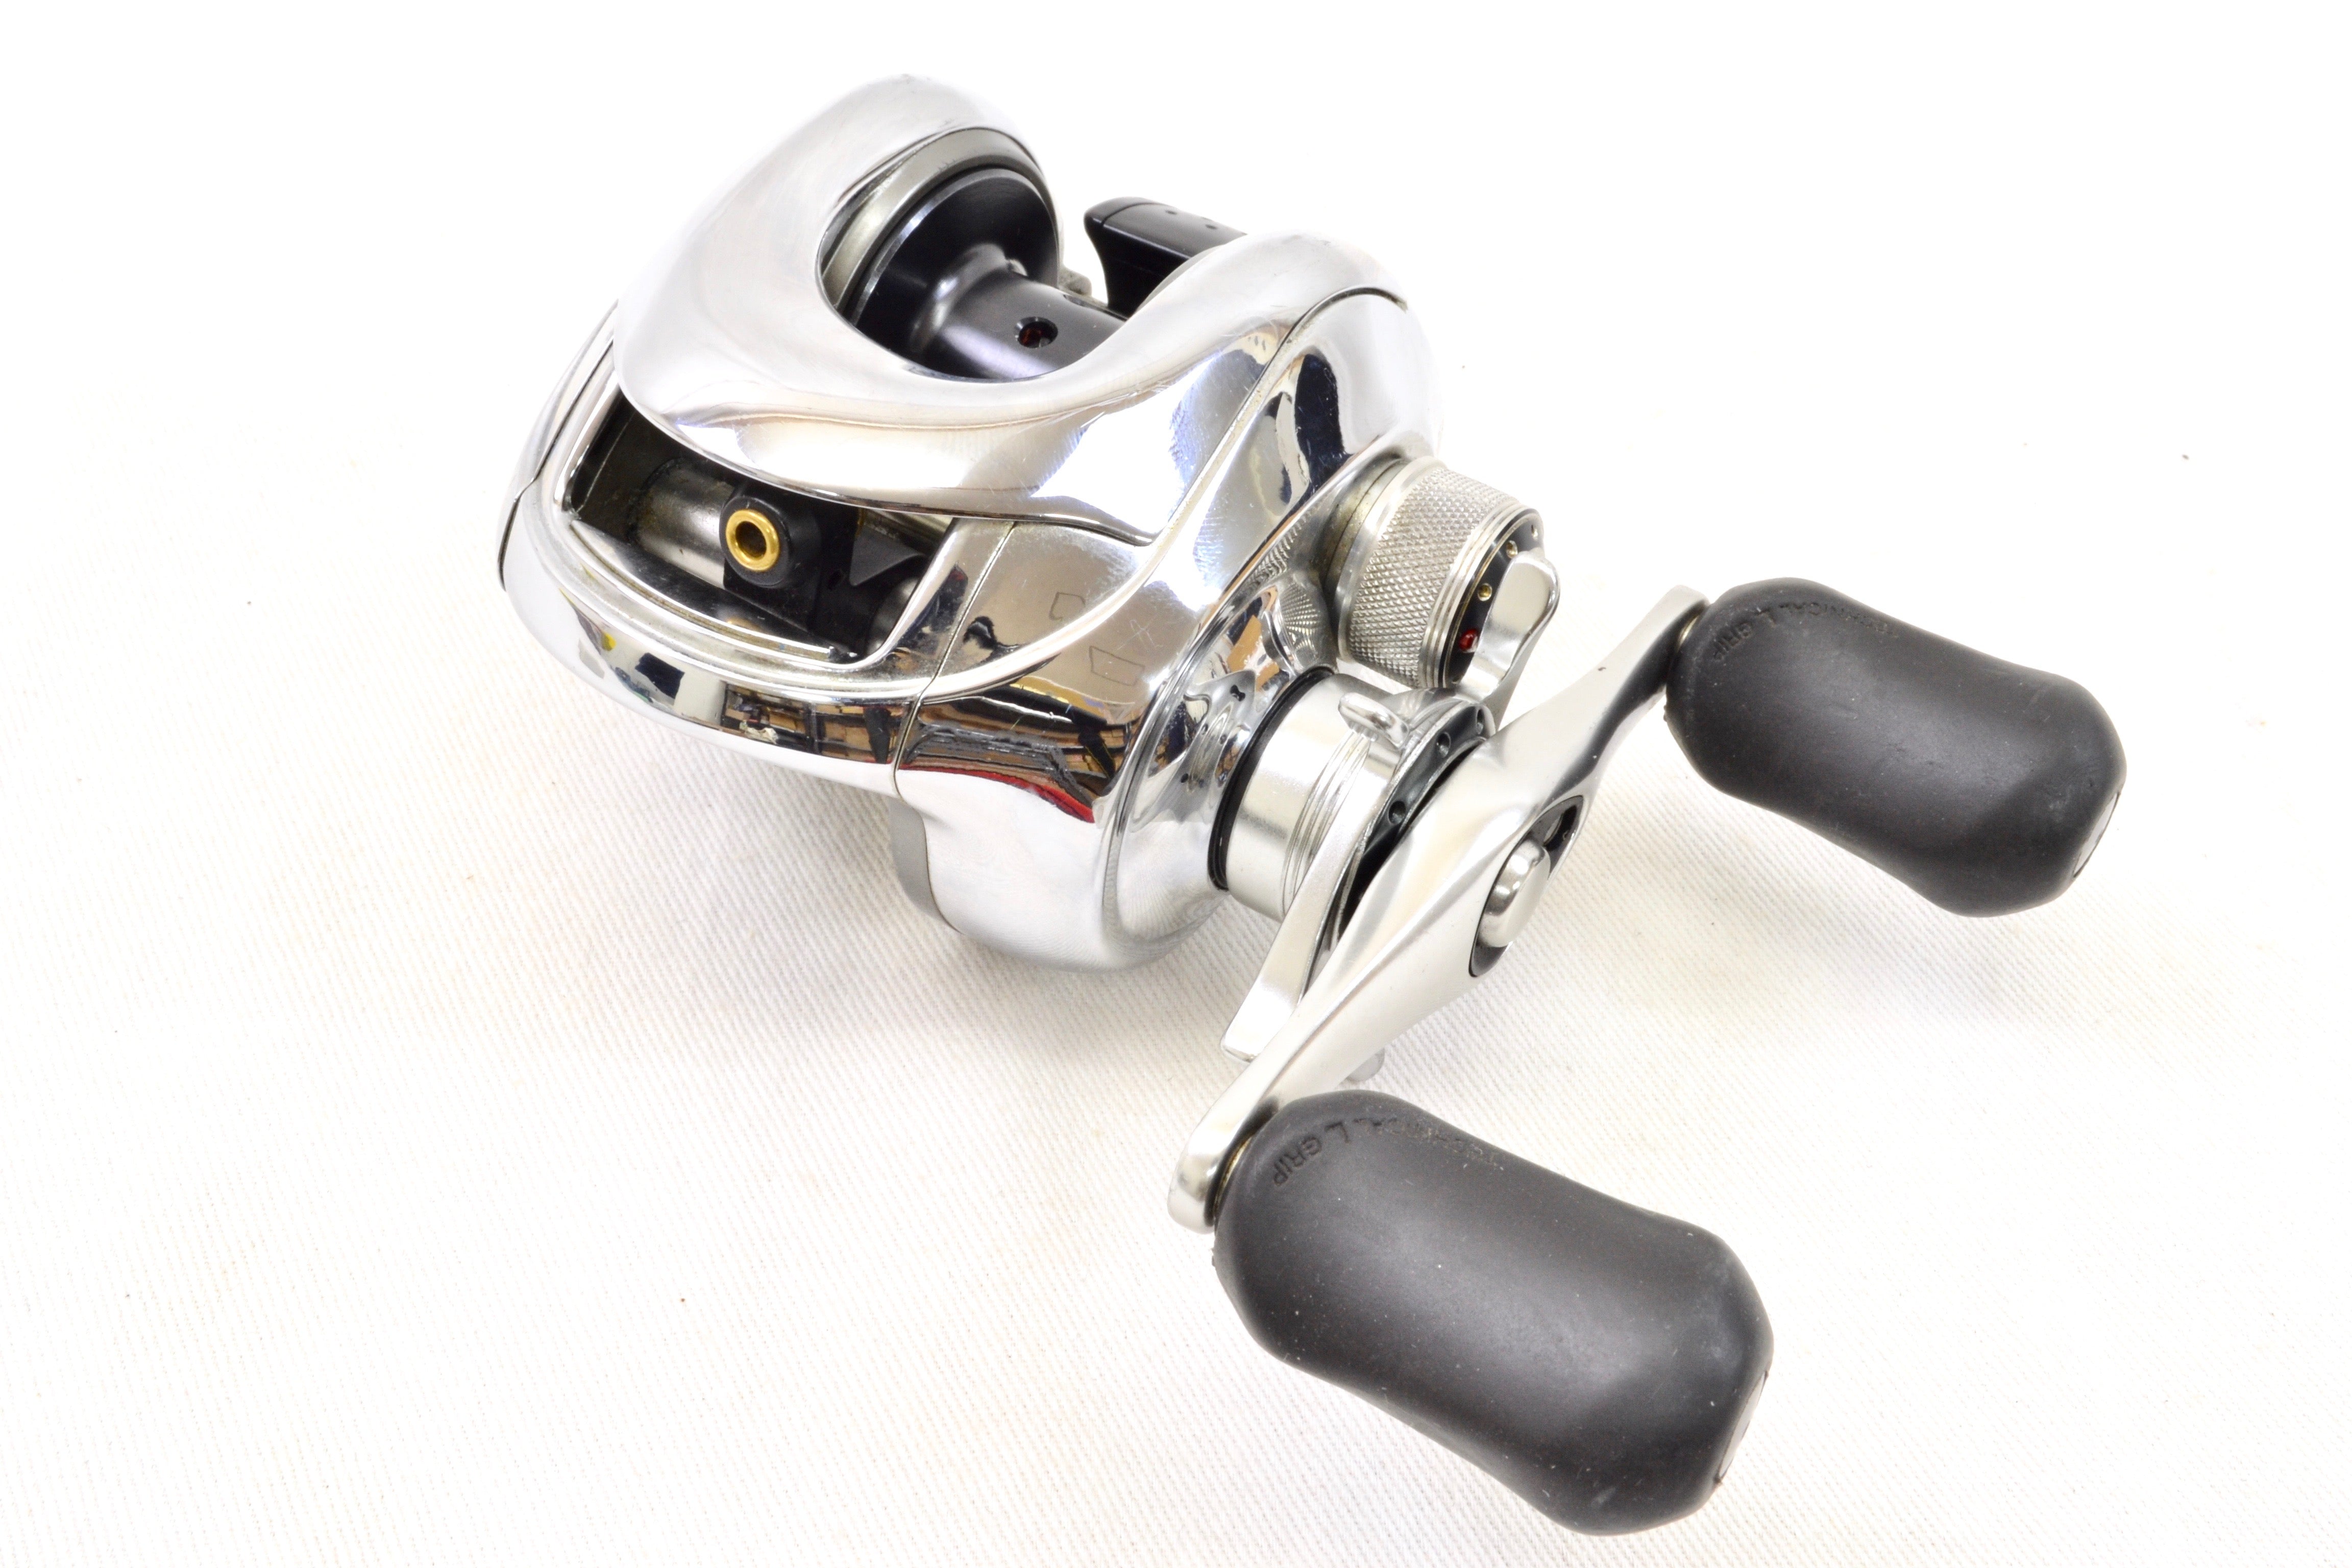 Used Shimano 06 Antares DC Left